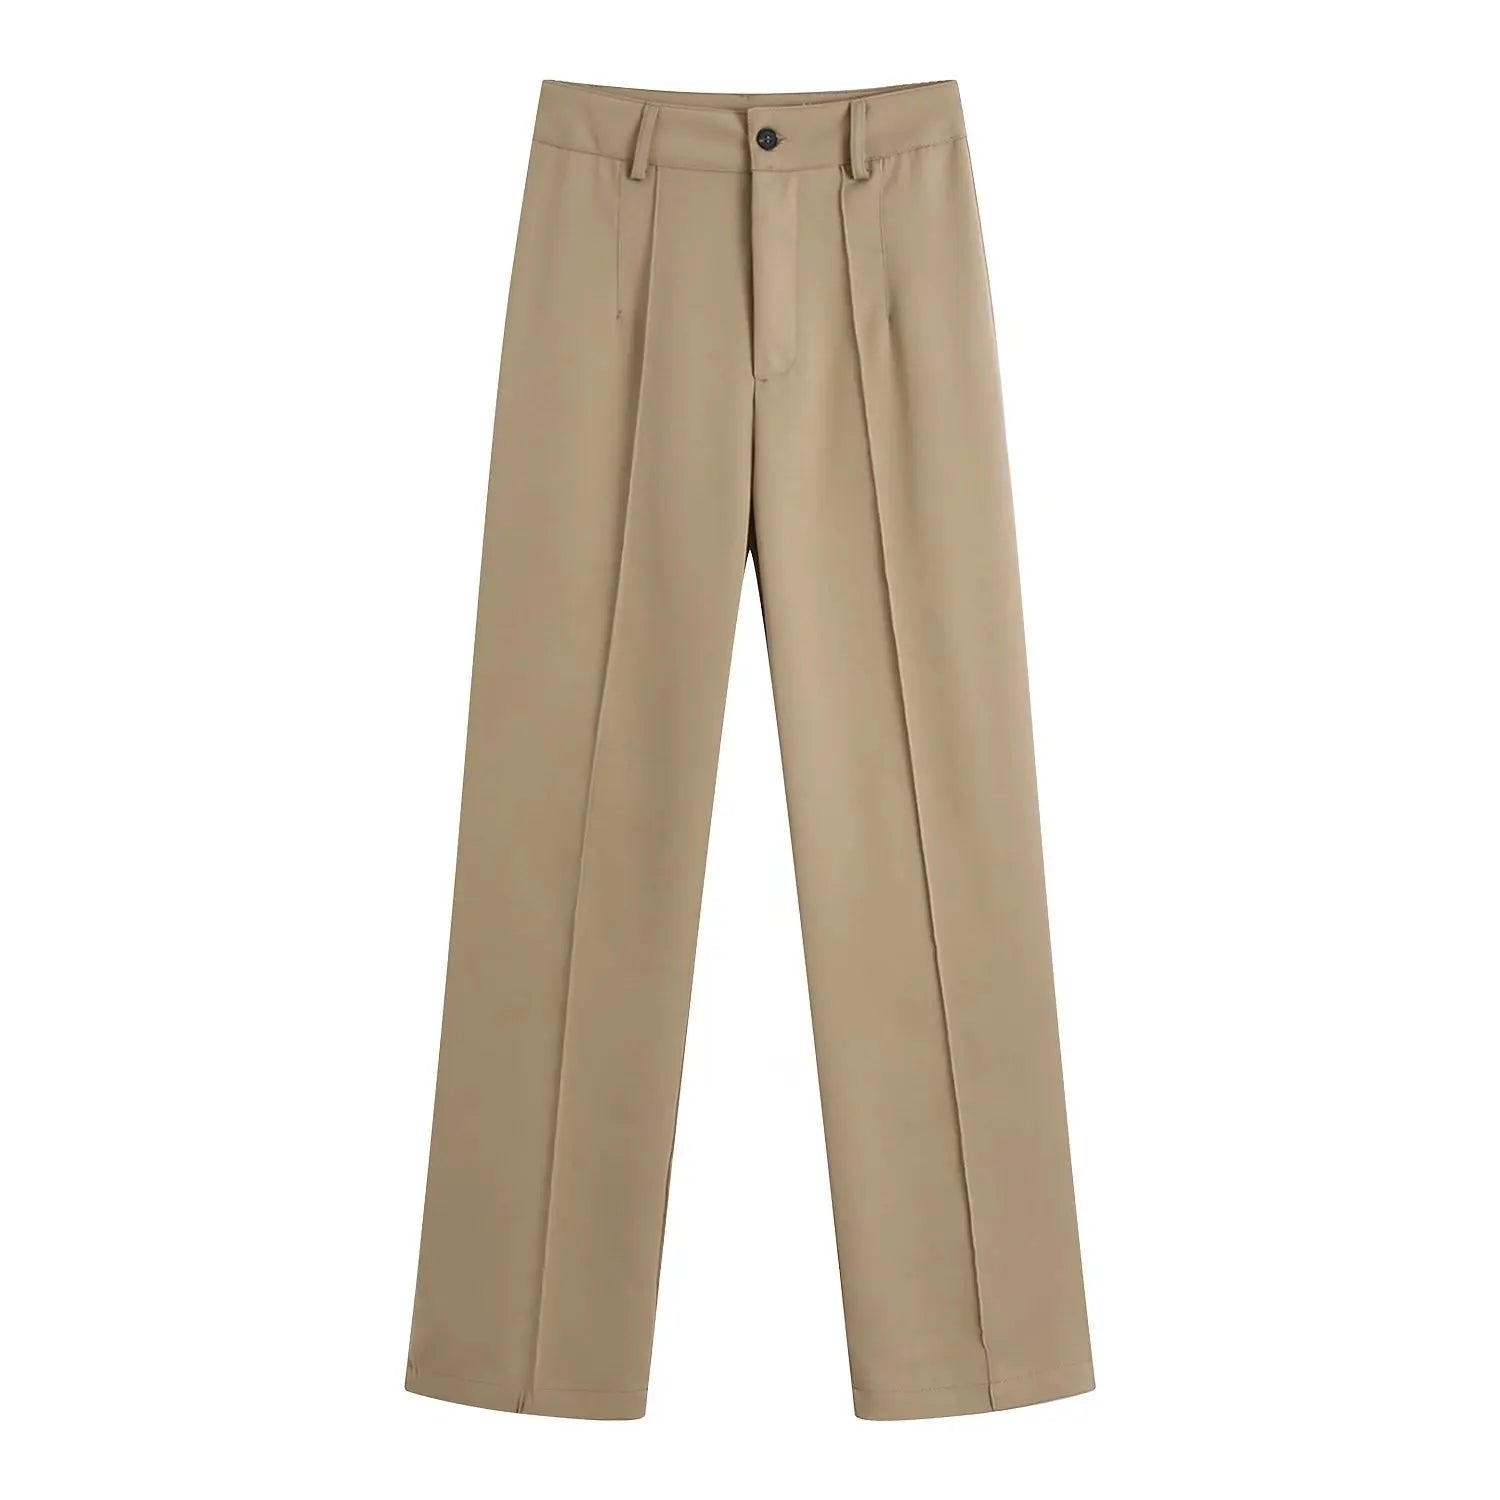 Ardm High Waisted Casual White Trousers Women Brown Stright Pants Office Lady Korean Style Women  Pantalones voguable